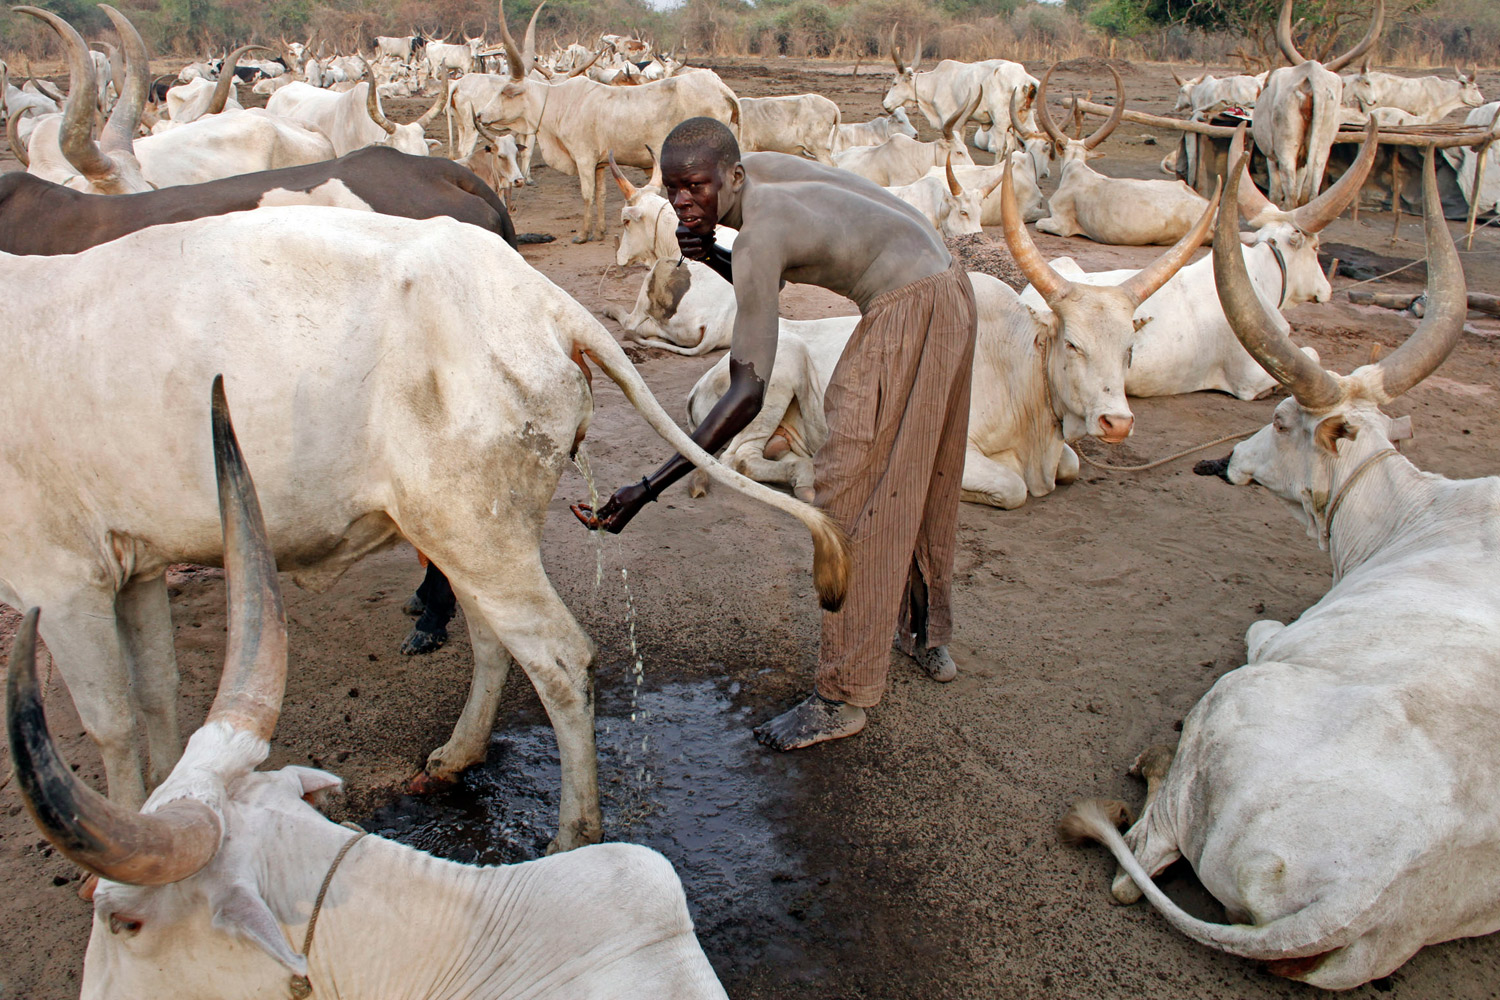 A man from the cattle-herding Mundari tribe washes himself with cow urine in a settlement near Terekeka, Central Equatoria state, Sudan, on Jan. 19, 2011. South Sudanese voted overwhelmingly to declare independence from the north in a January referendum.